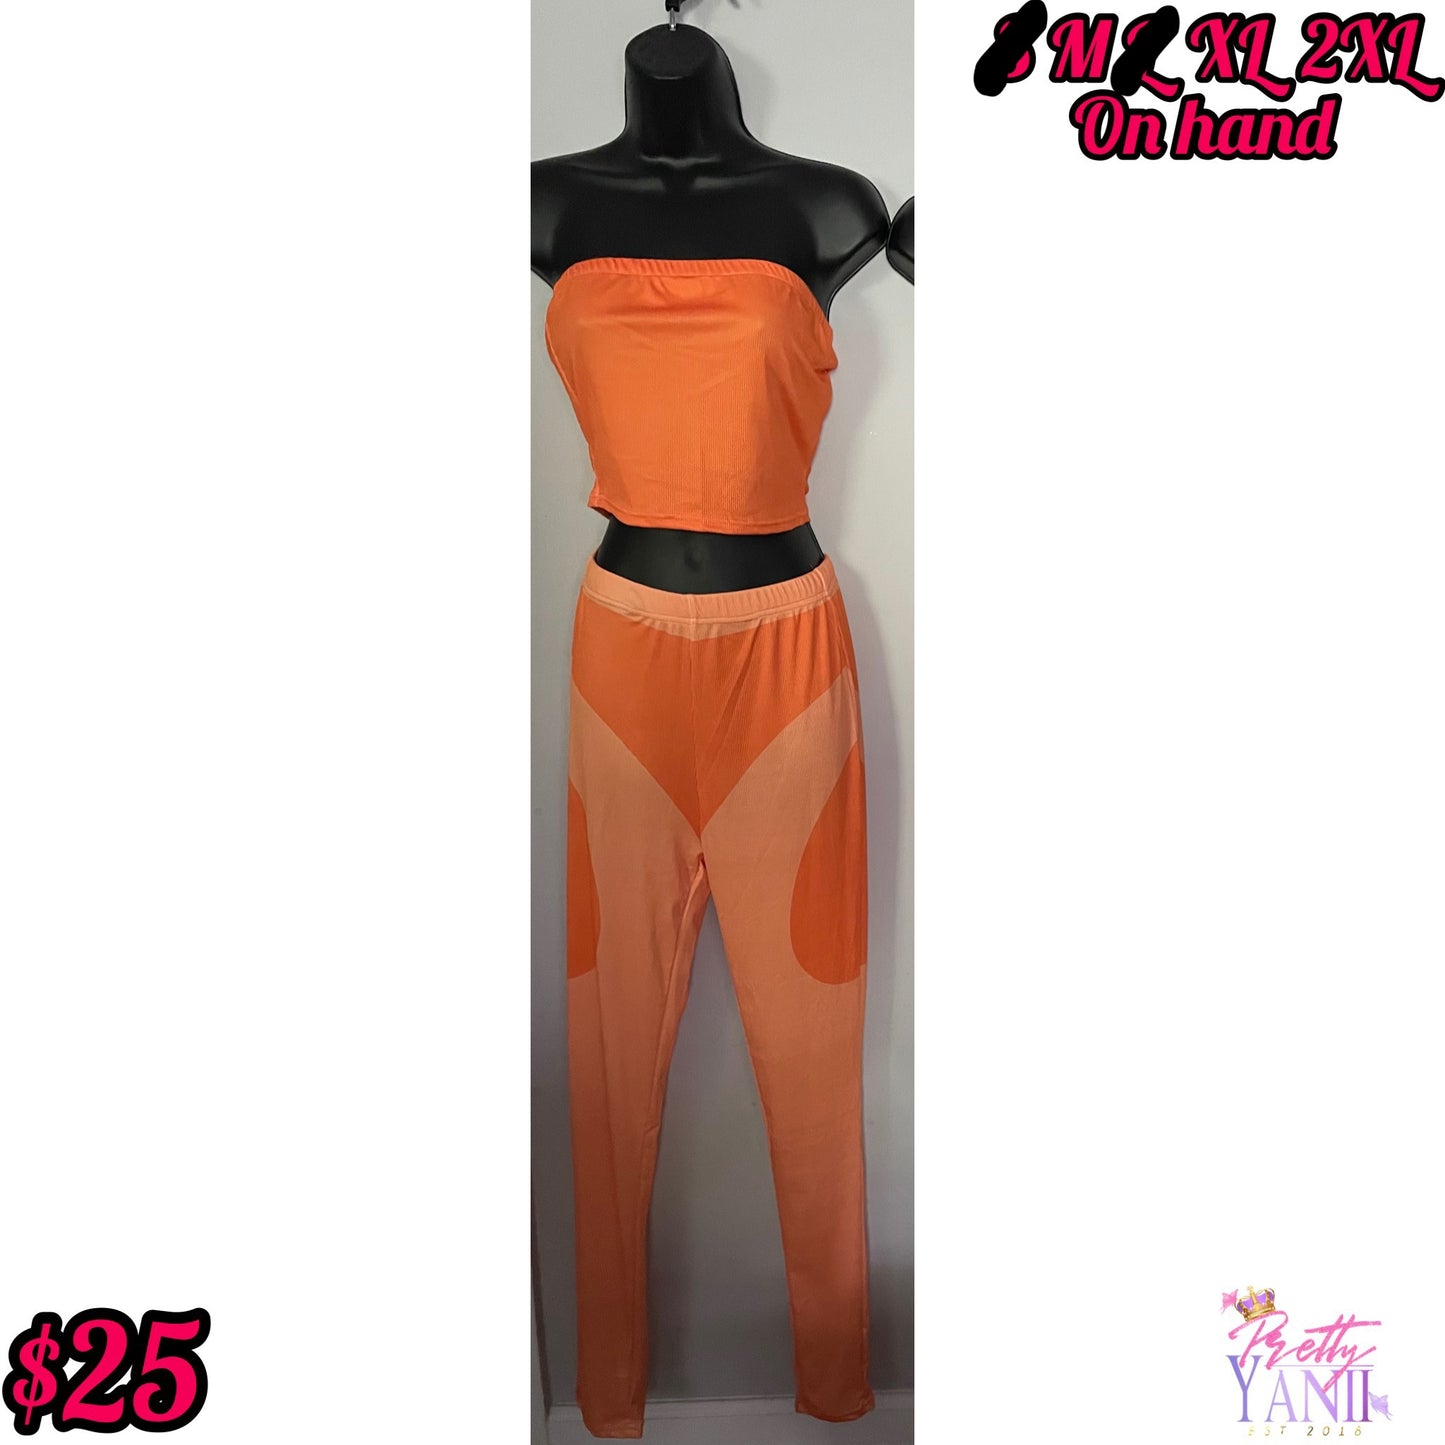 matching set includes an orange tube top and pants with exceptional stretch